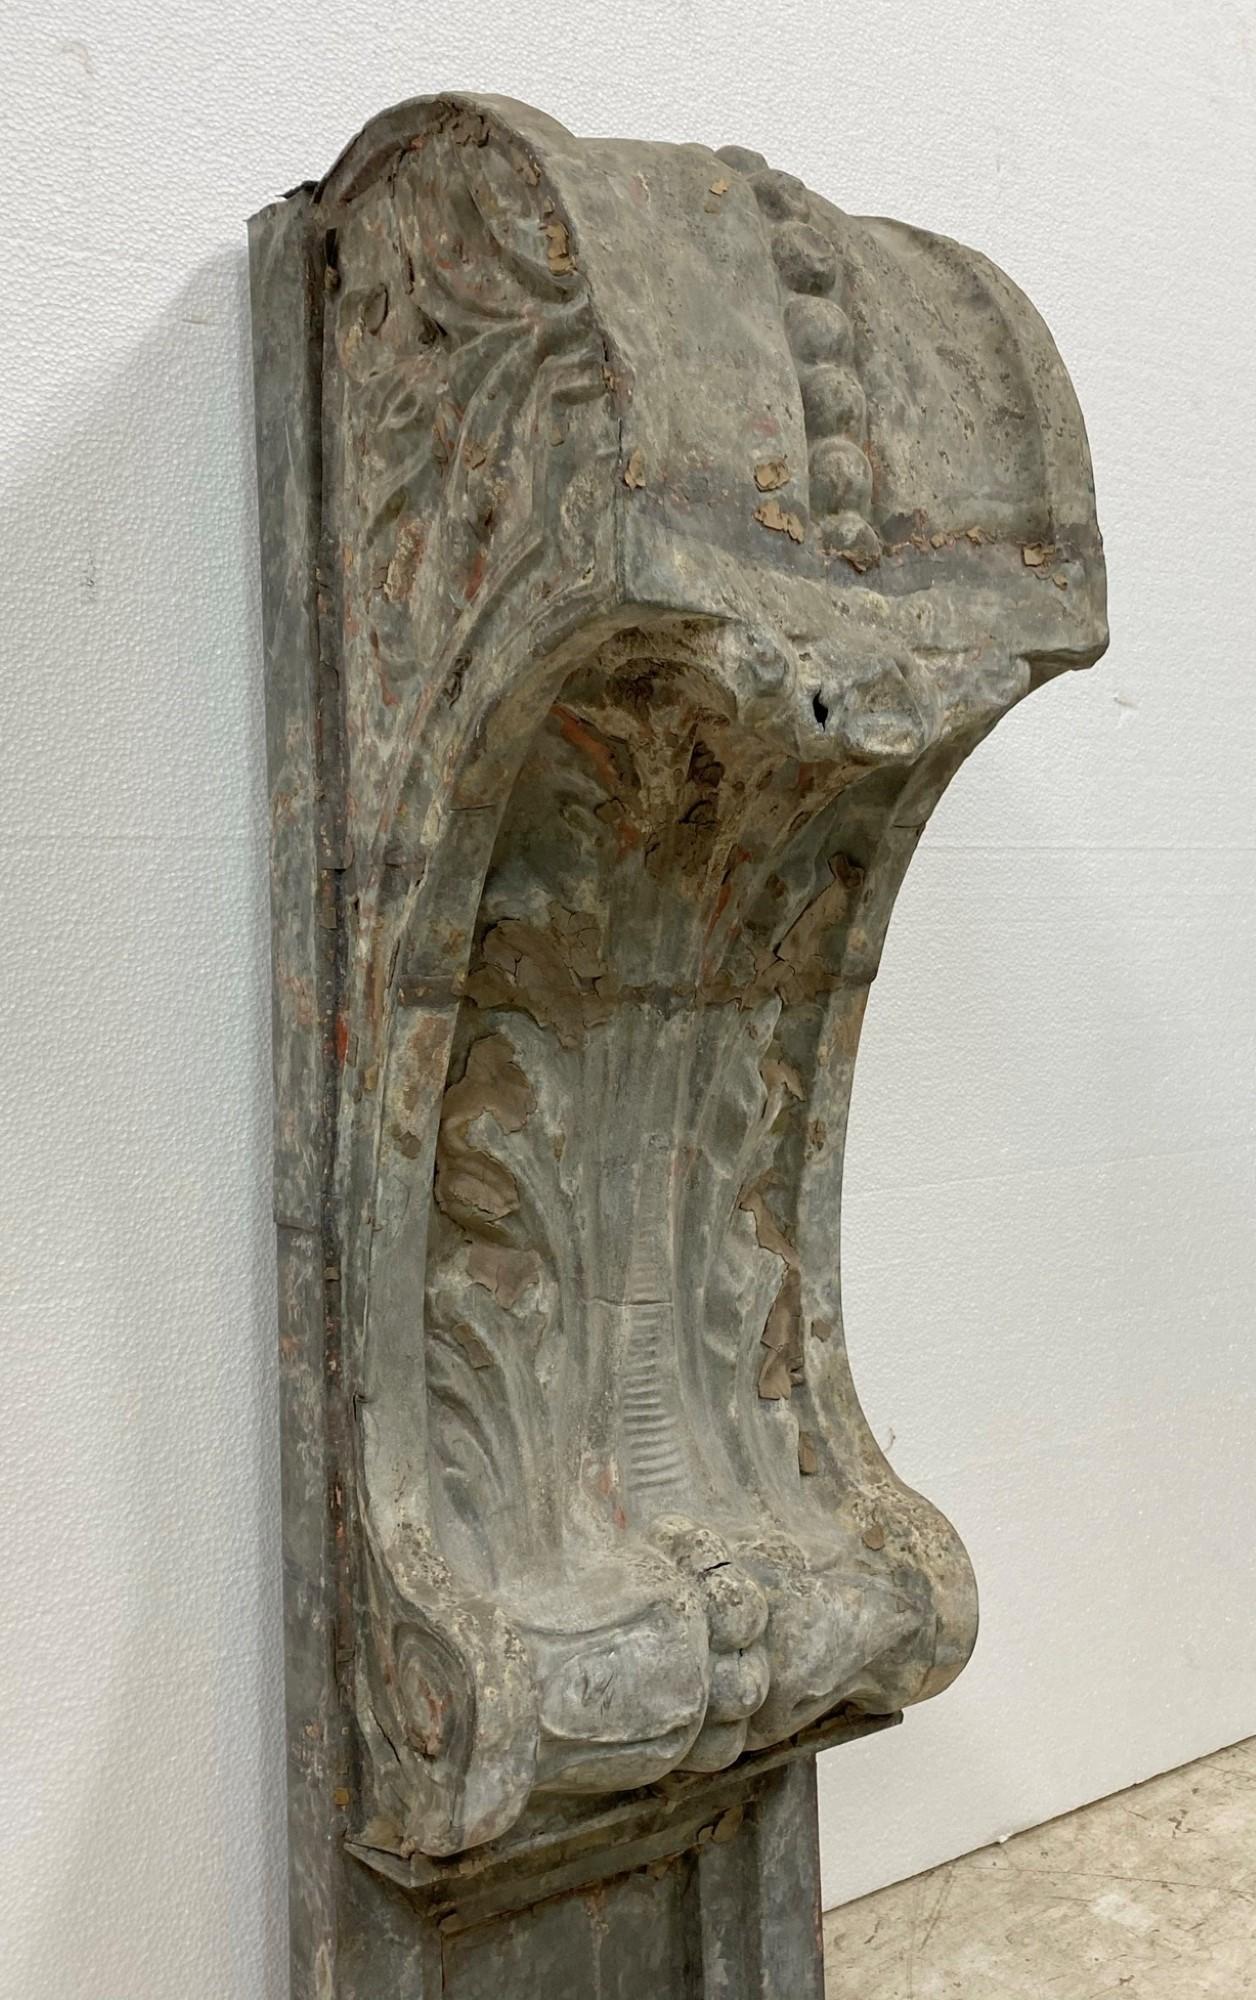 19th Century Zinc Corbel with Floral Design from Turn of the Century Building Facade